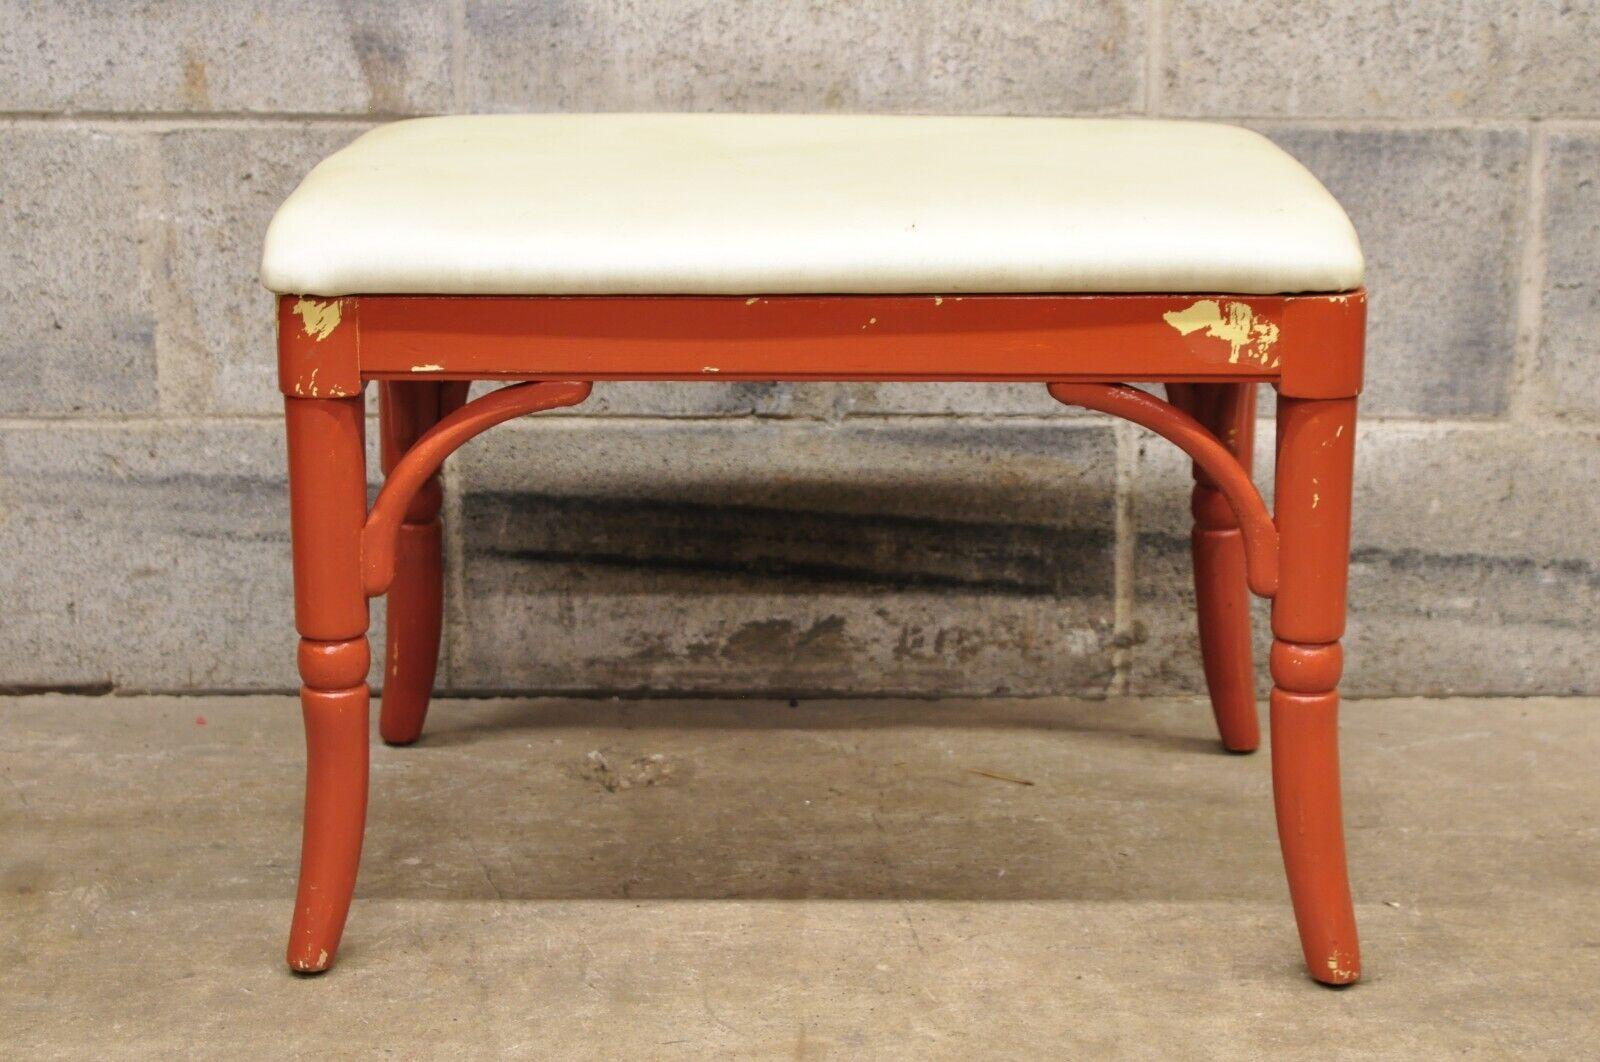 Thomasville Allegro Faux Bamboo Hollywood Wood Coral Painted Vanity Bench 4